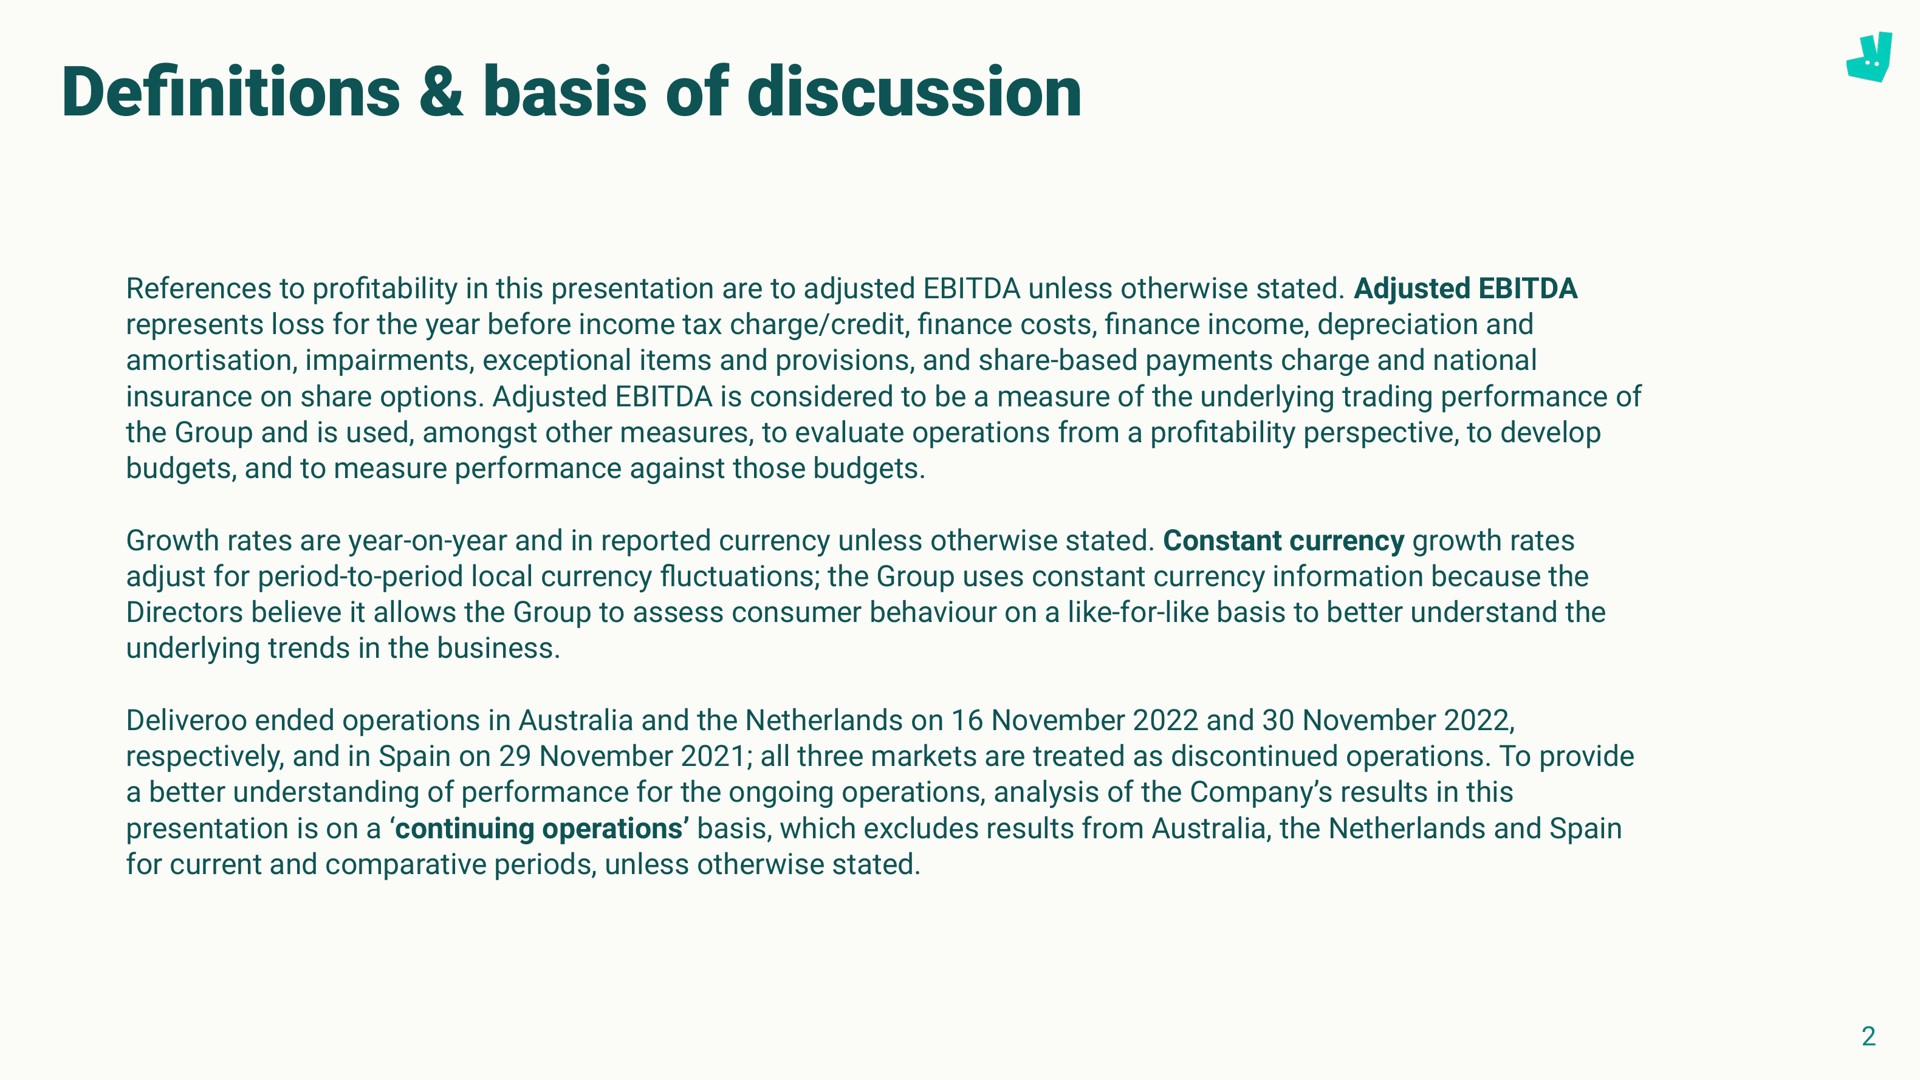 basis of discussion definitions | Deliveroo